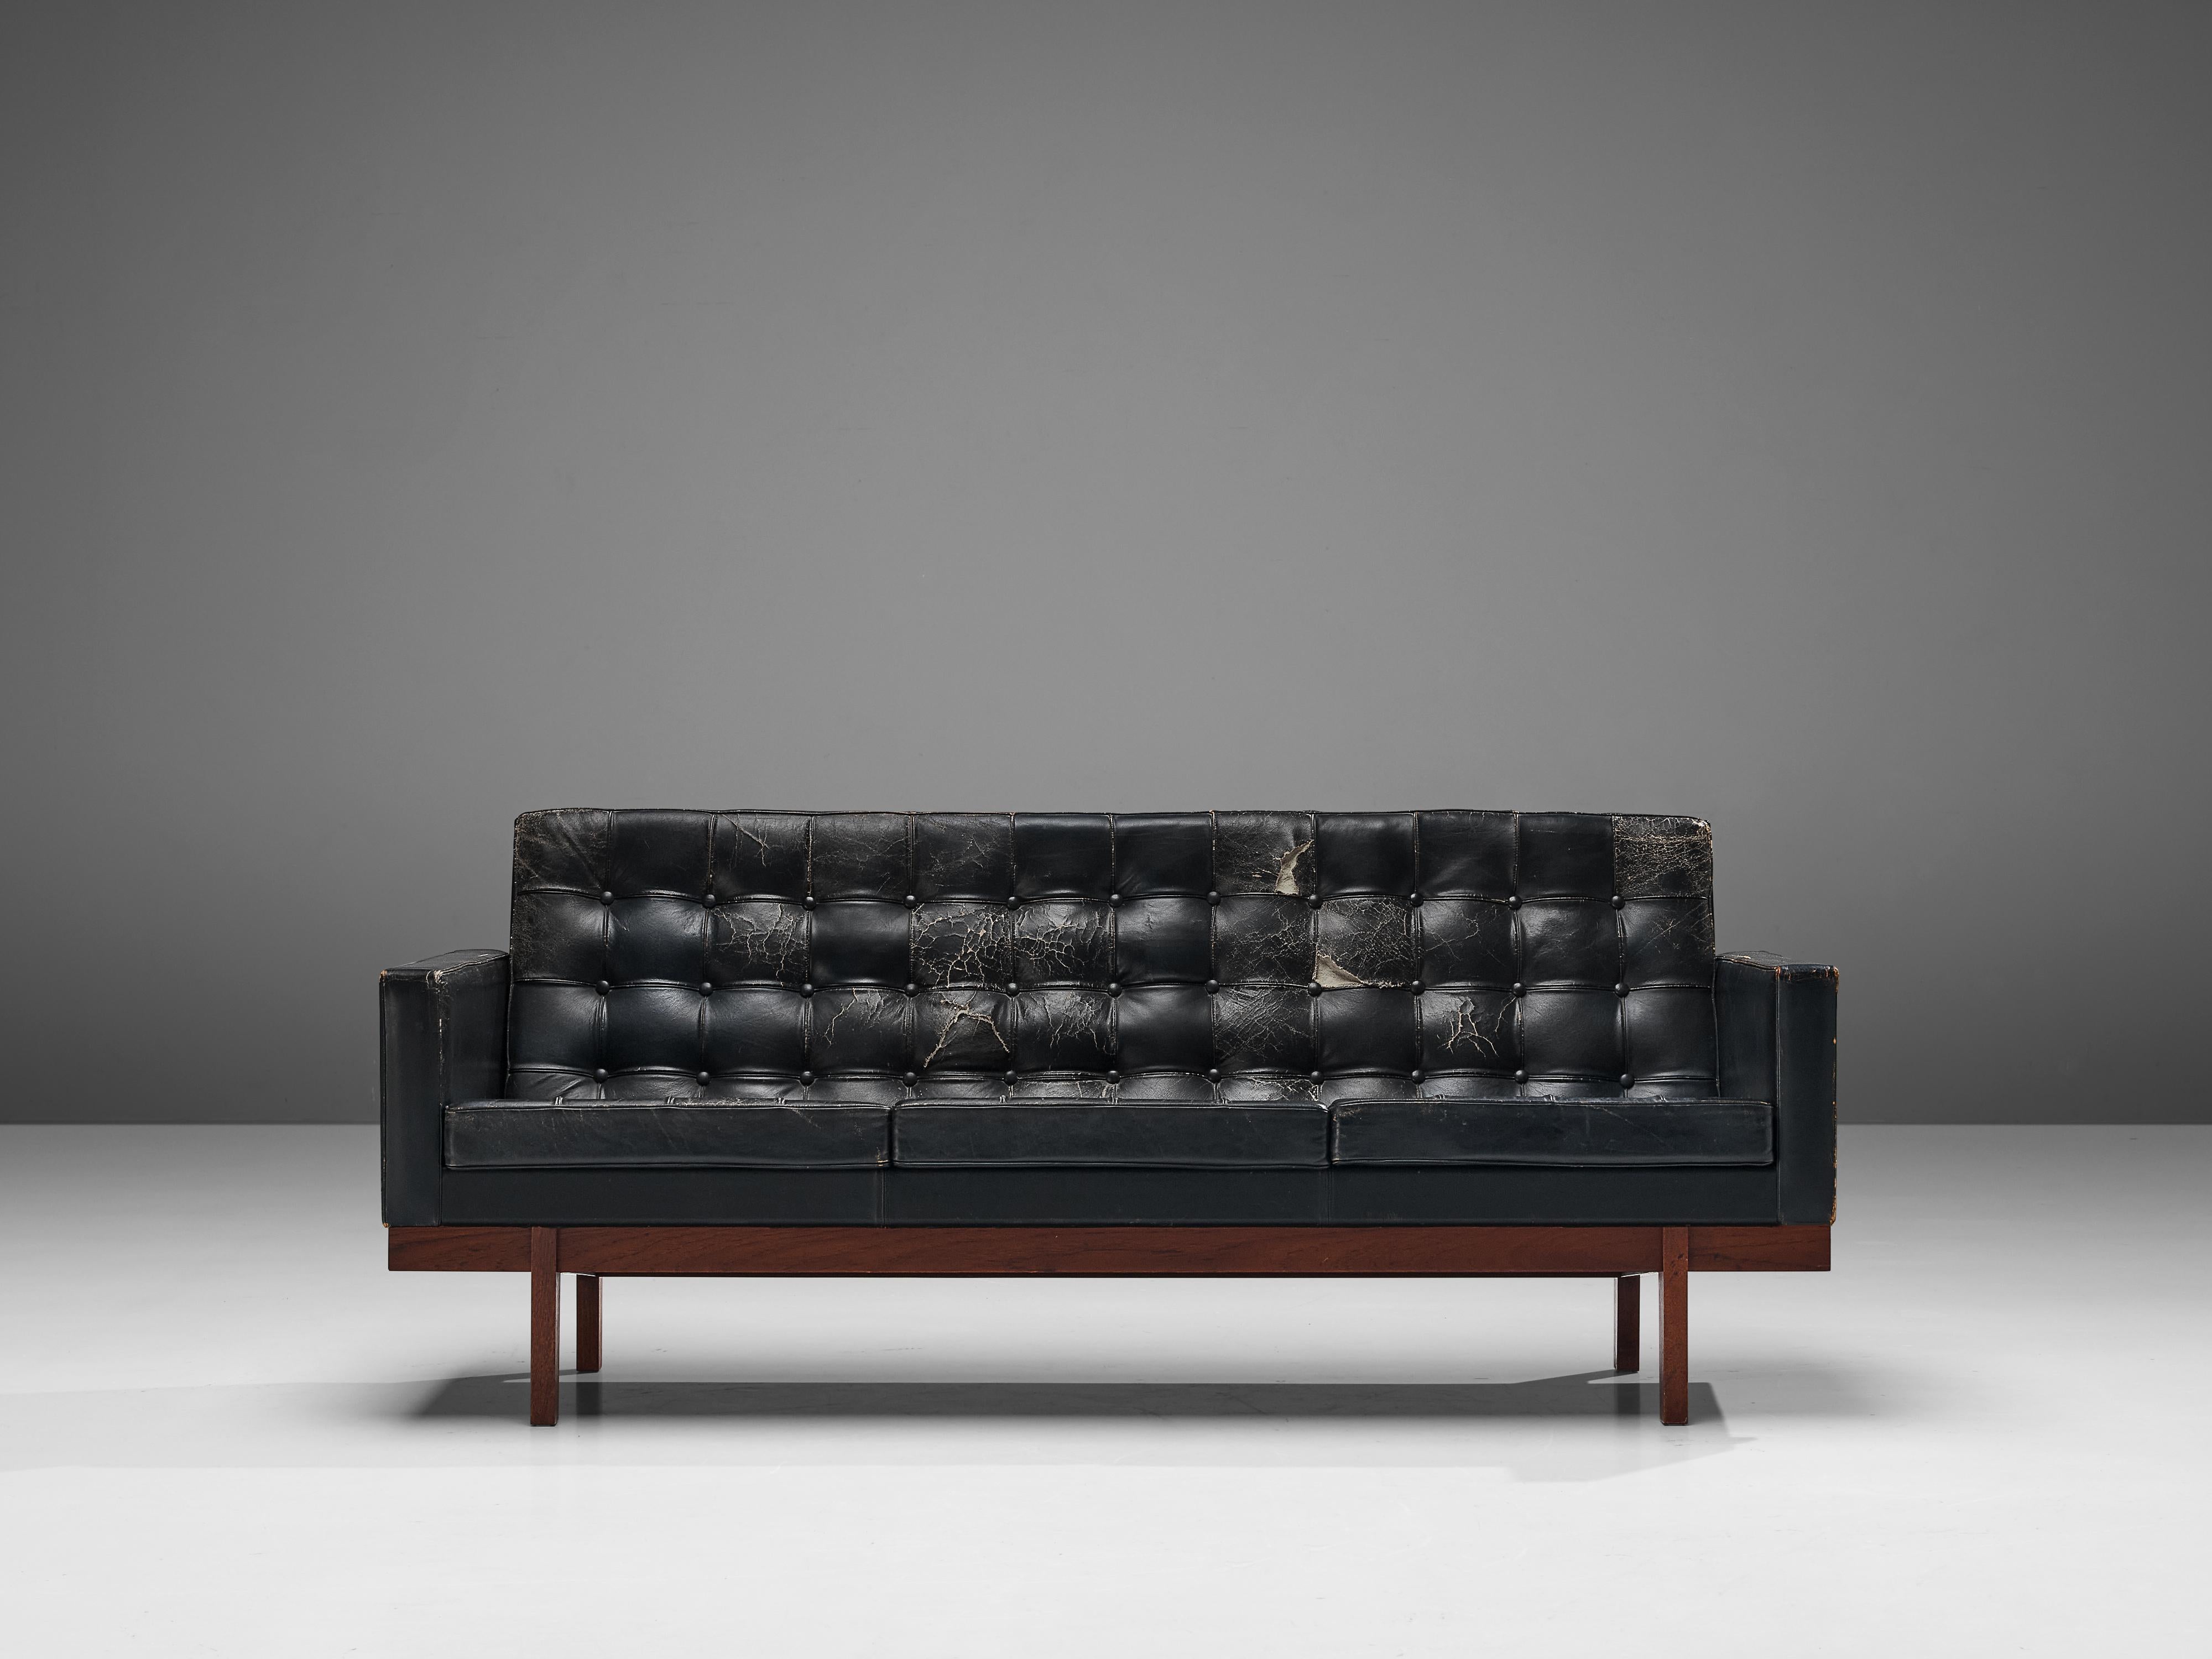 Karl Erik Ekselius for JOC, sofa, leather, teak, Sweden, 1960s

This Swedish sofa by Karl Erik Ekselius showcases the typical characteristics of  Scandinavian Modern Design. The unit revolves around a linear and strict layout with sharp lines and